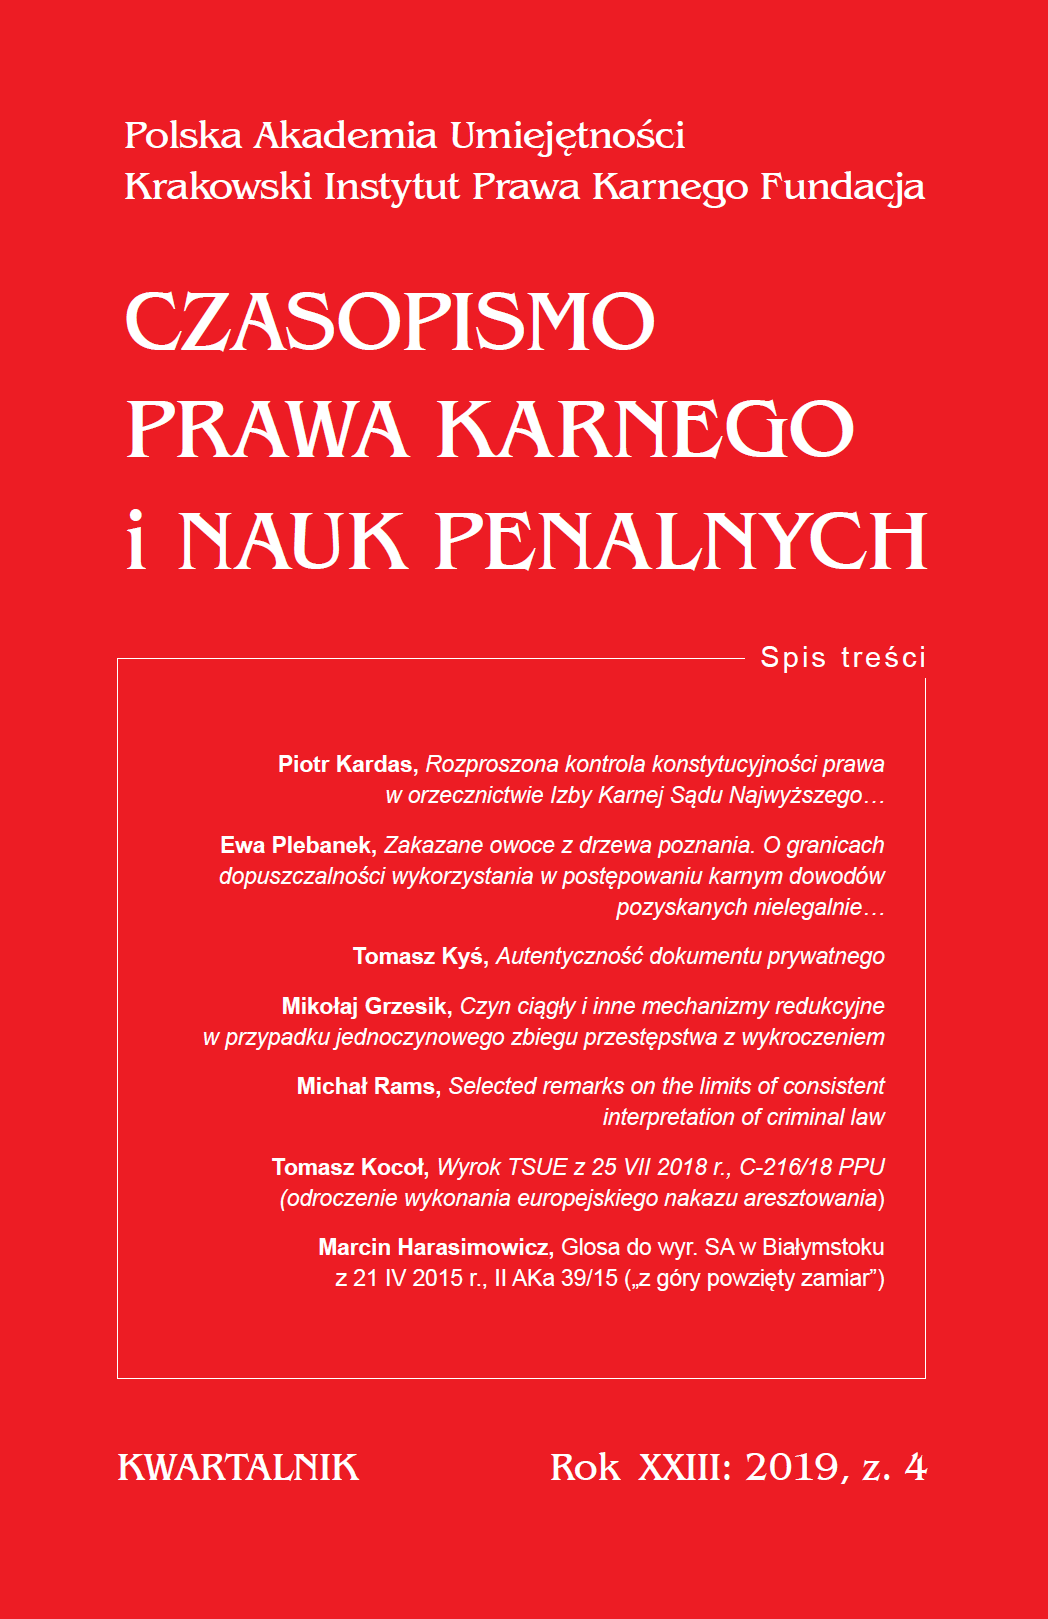 „Criminal Proceedings in Cases Prosecuted by Public Accusation” as a Premise for Suspension of the Rector From His or Her Duties (Article 432 section 4 of the Law on Higher Education and Science) Cover Image